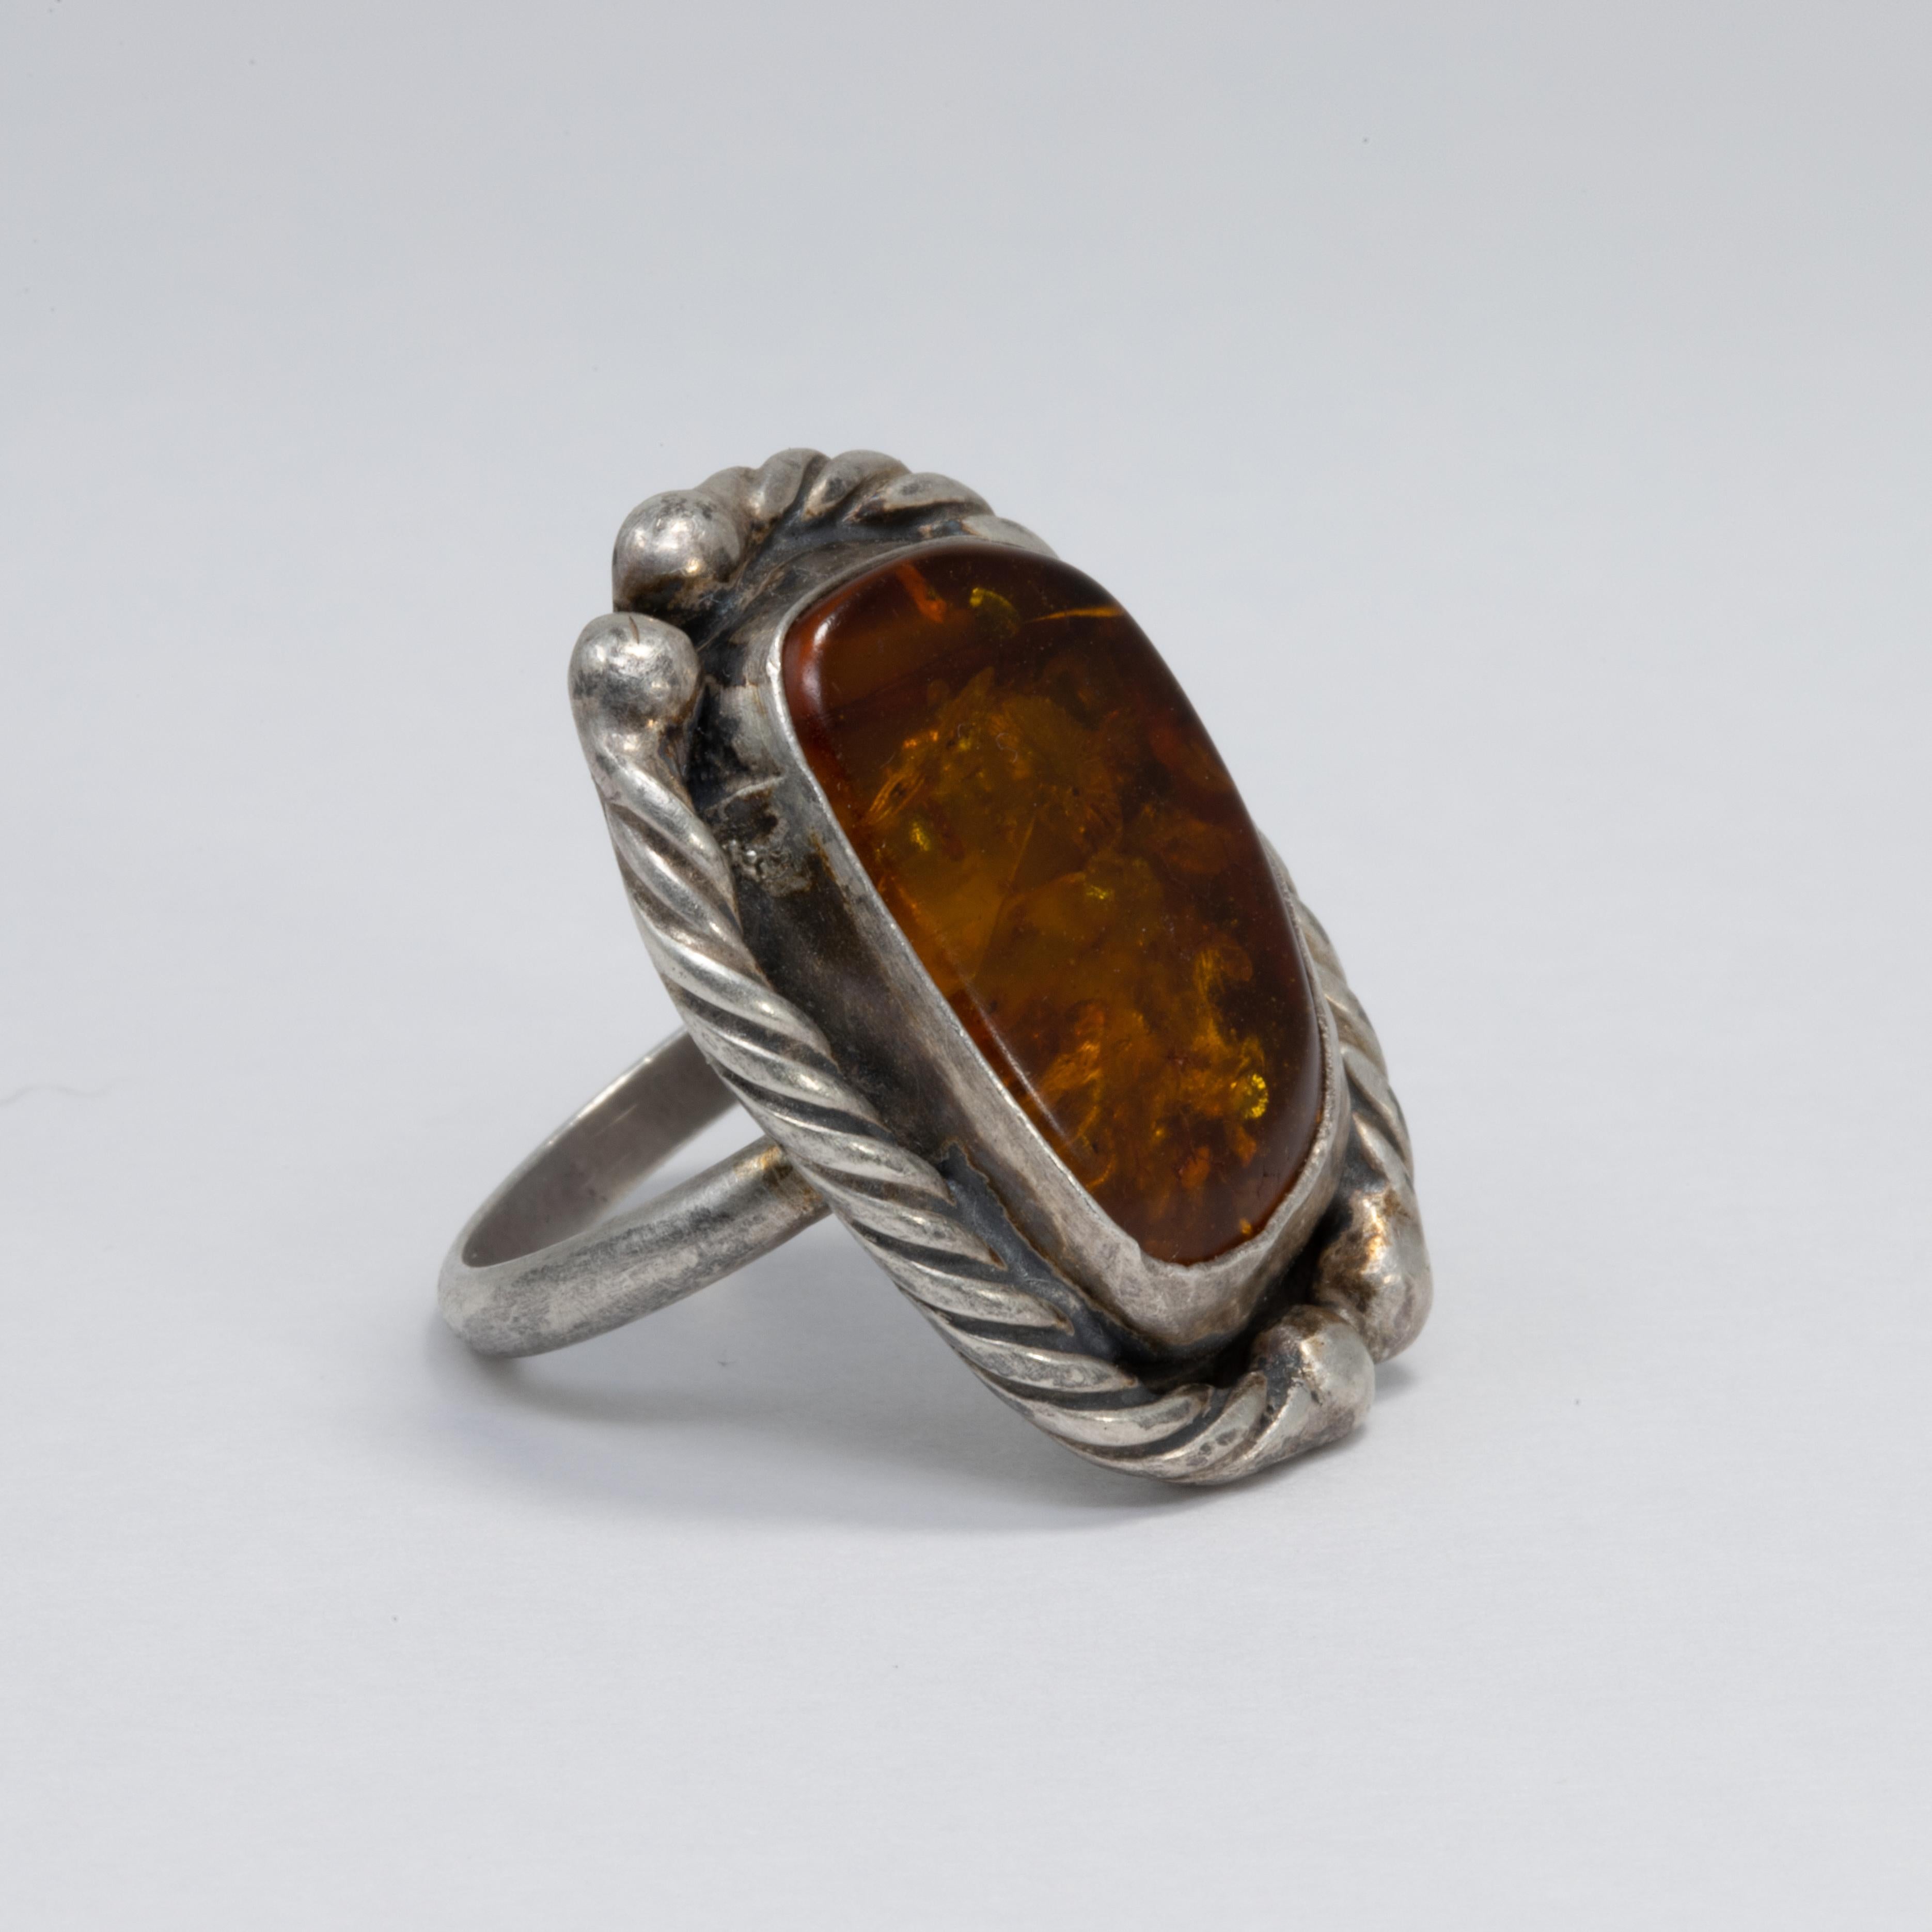 Exquisite sterling silver statement ring with an amber cabochon set in a decorative bezel.

Ring size US 7

Marks / hallmarks / etc: 8yan Sterling